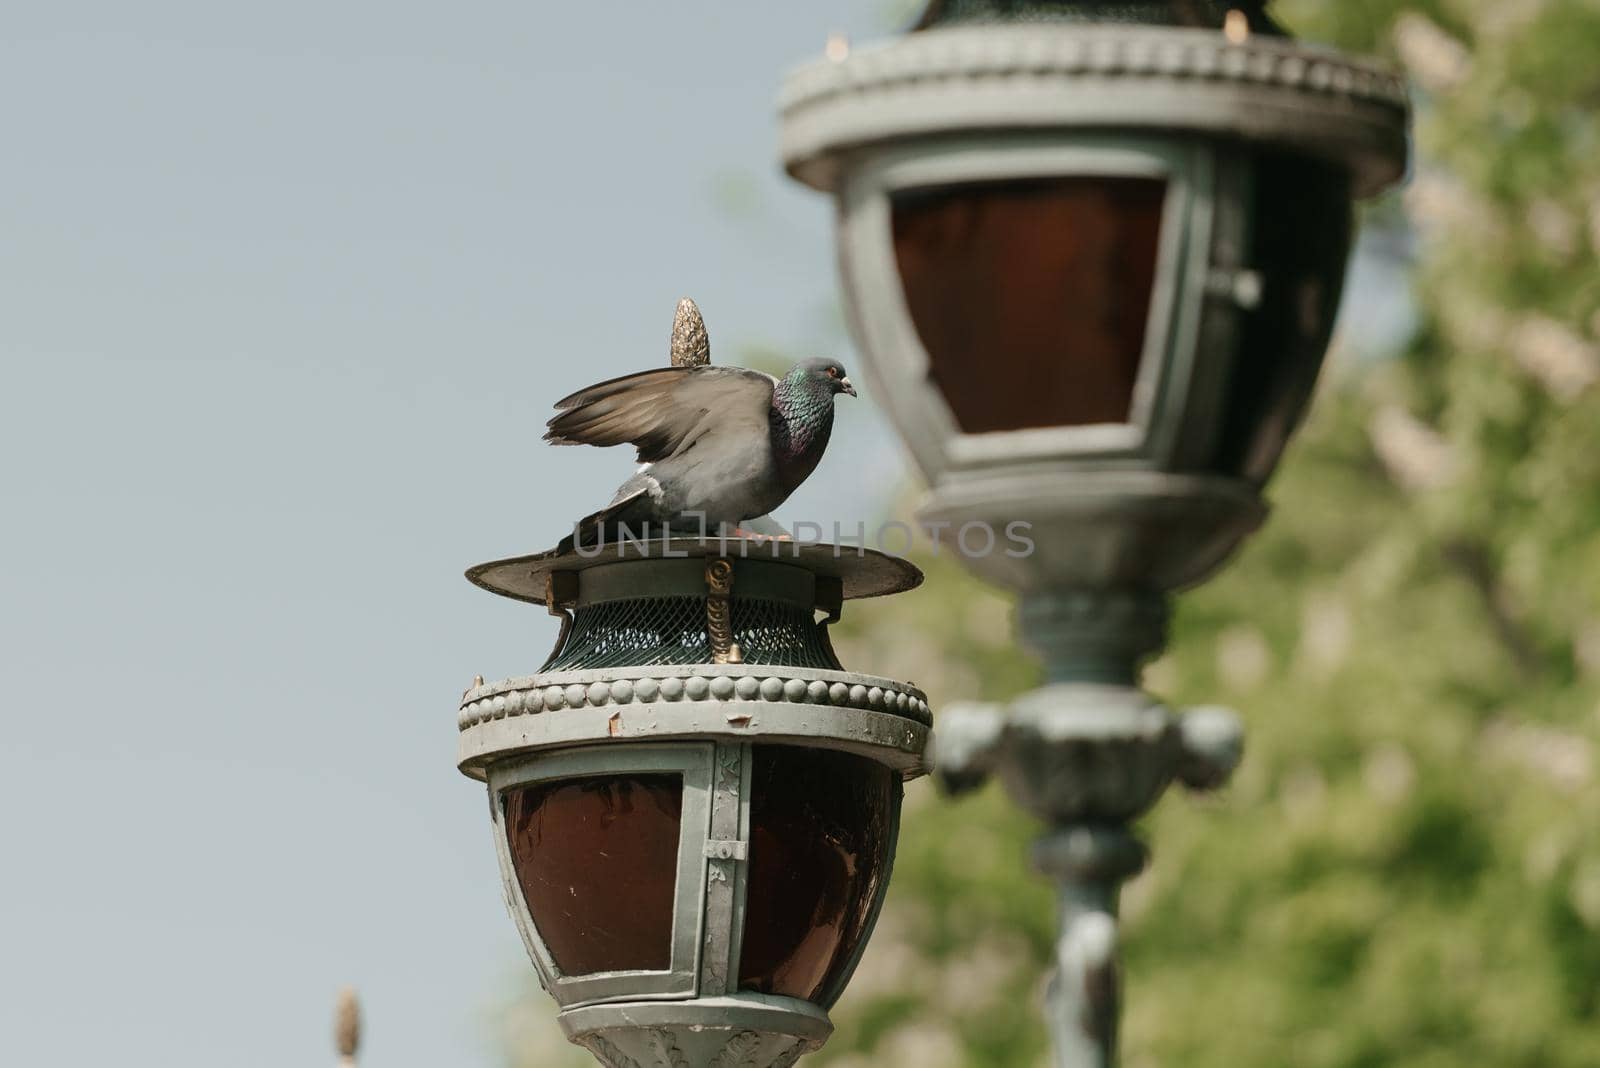 Warsaw, Poland - MAY 12, 2022: The pigeon on the head of the lamppost on the Palace on the Isle in Royal Baths Park, Lazienki Park